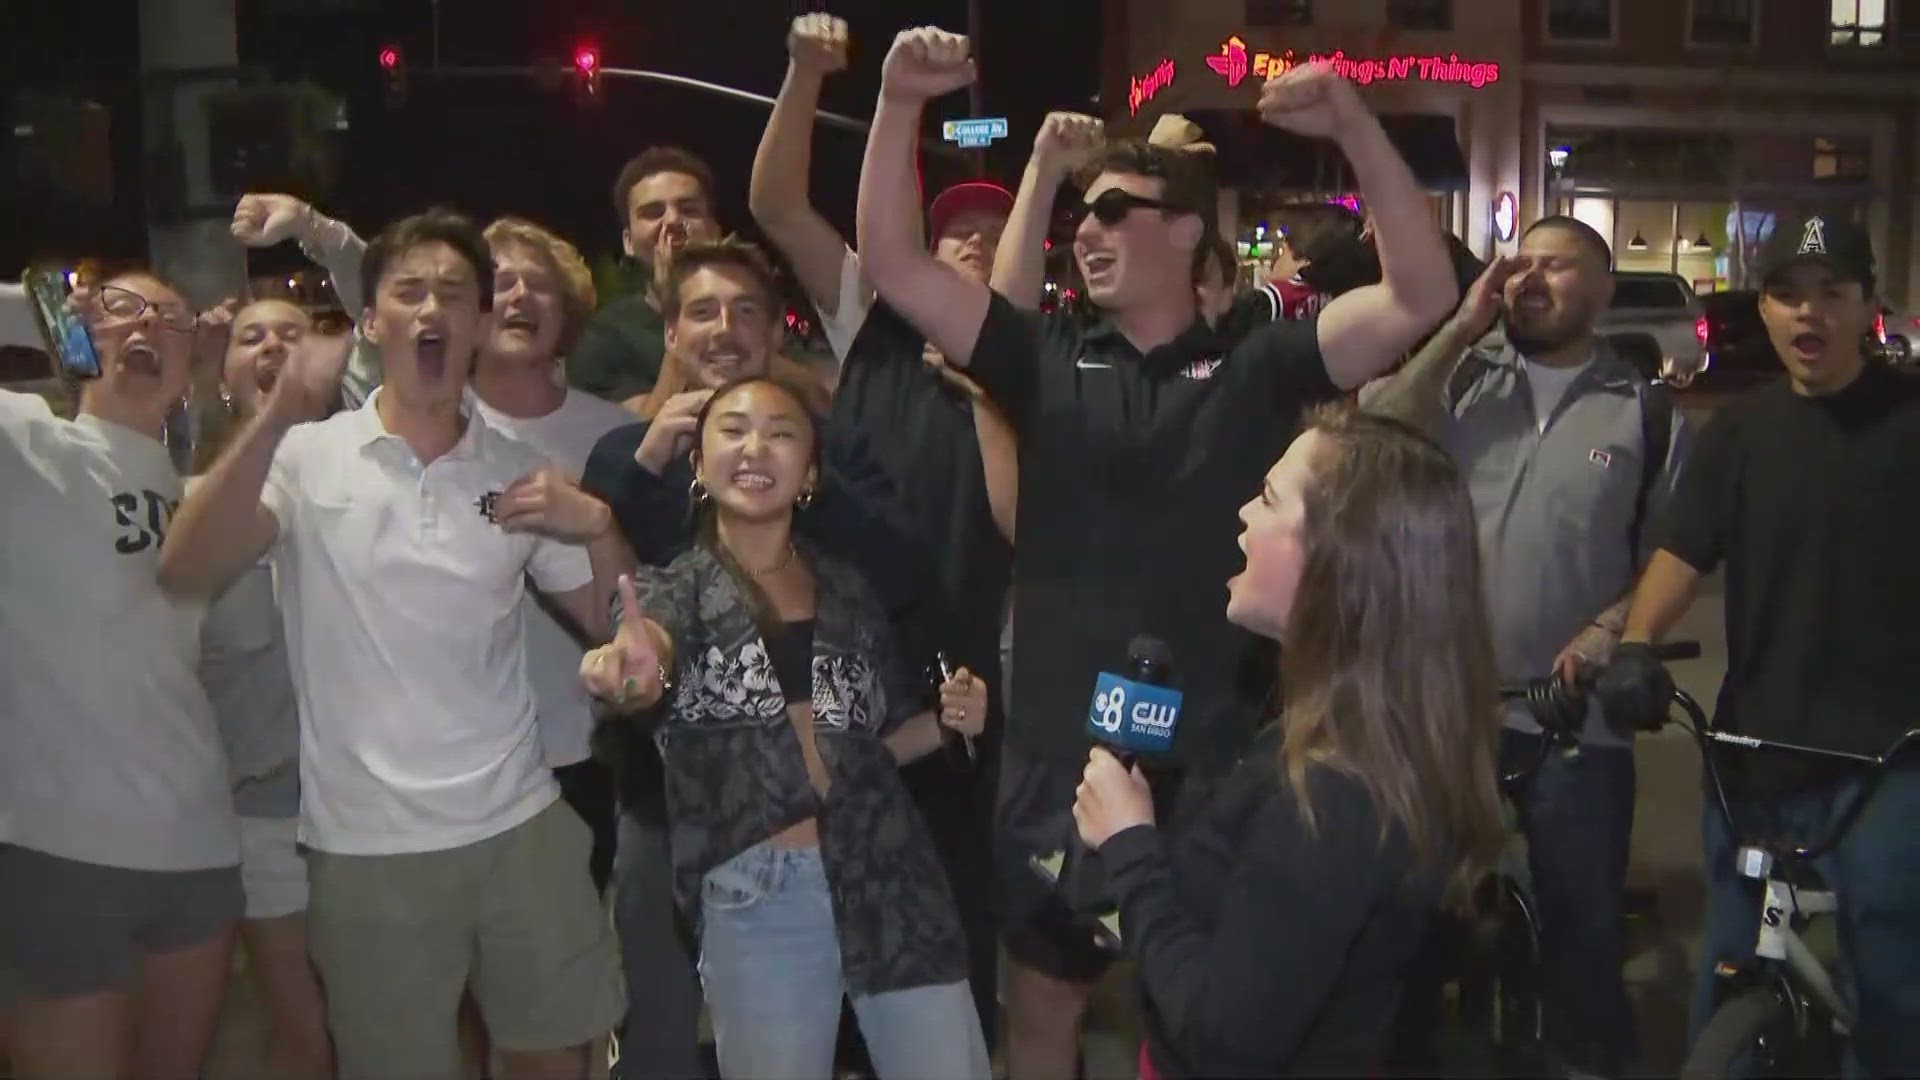 San Diegans stoked over SDSU Aztecs victory in NCAA March Madness.